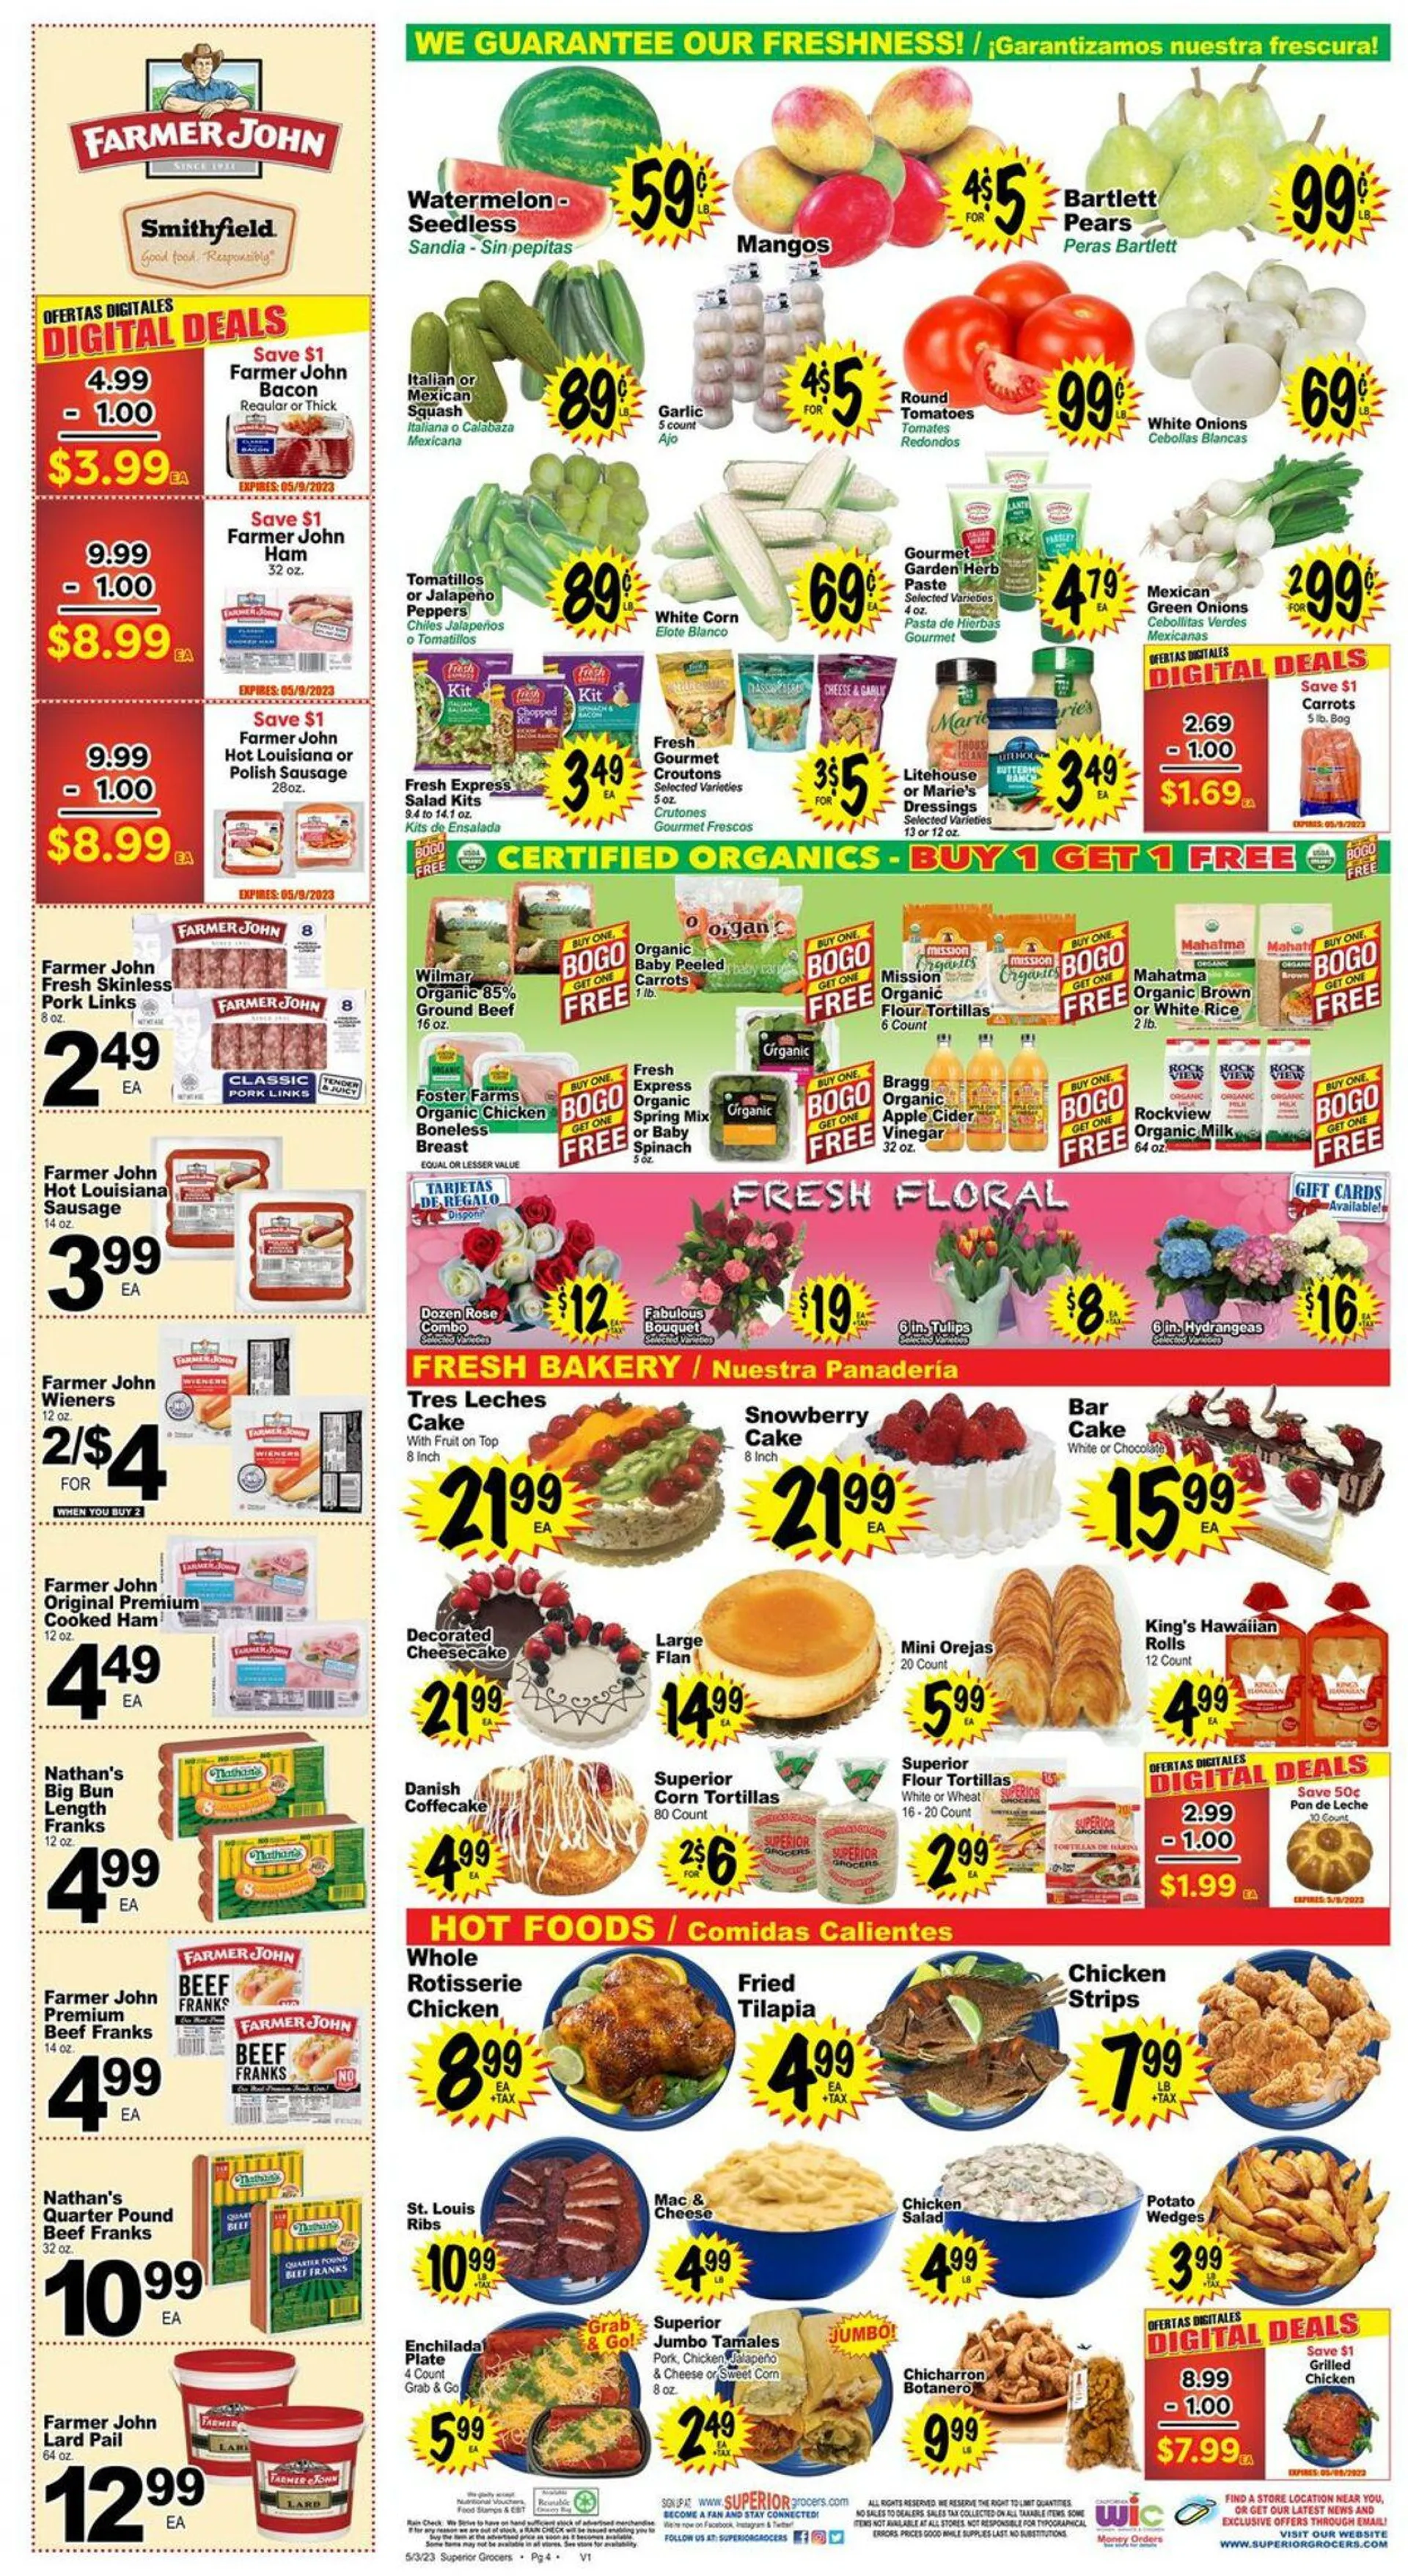 Superior Grocers Current weekly ad - 4